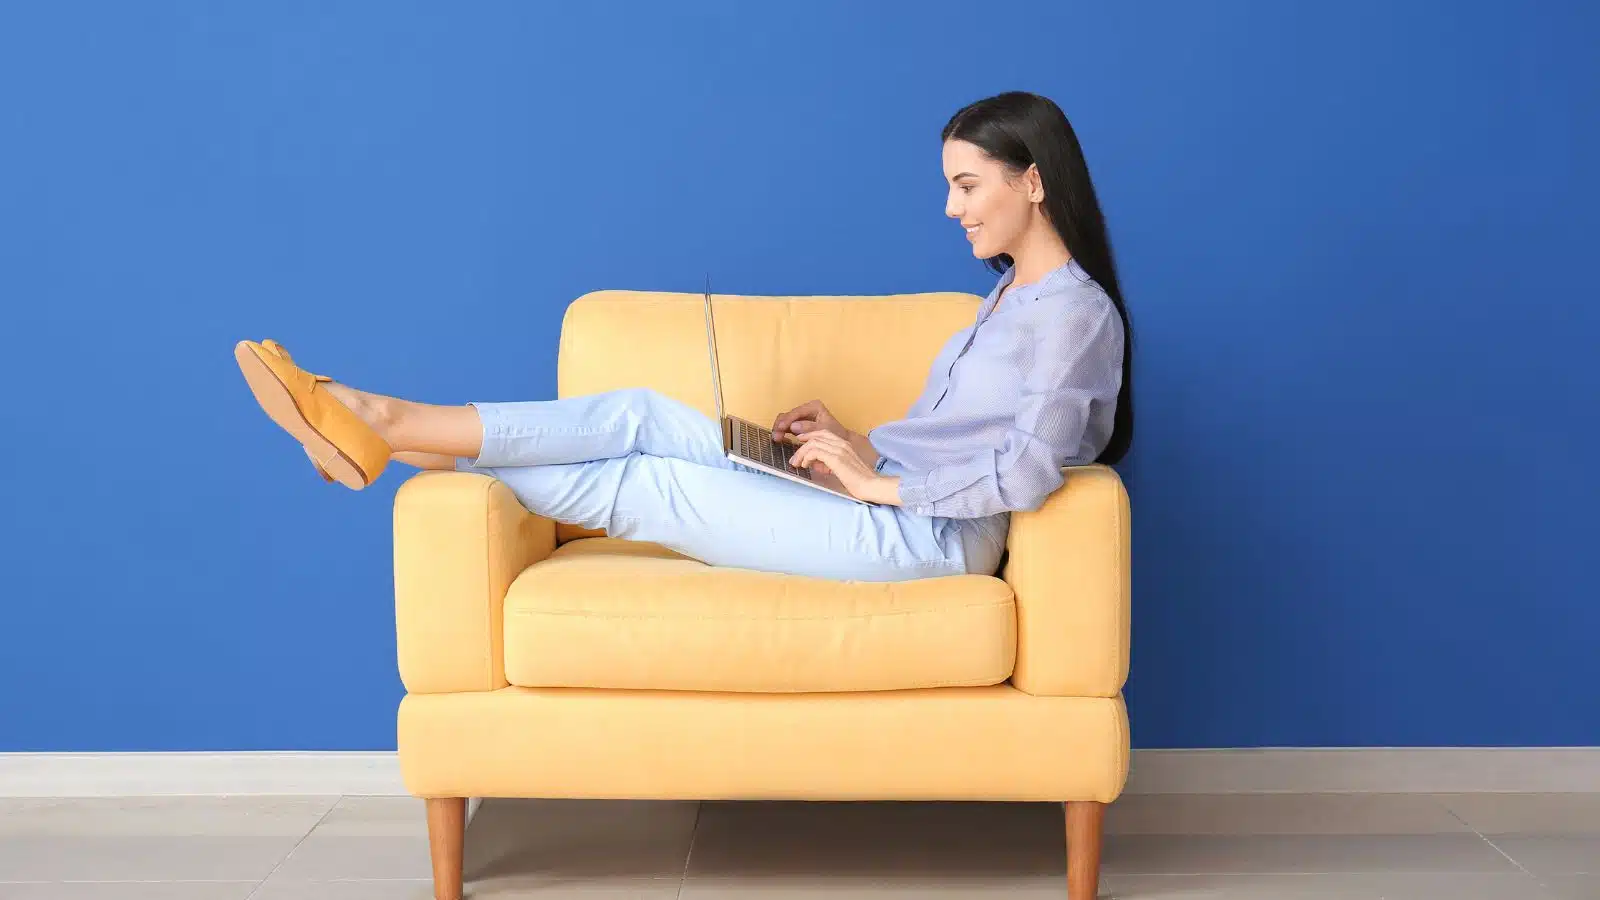 young woman sitting on a yellow chair on her laptop smiling